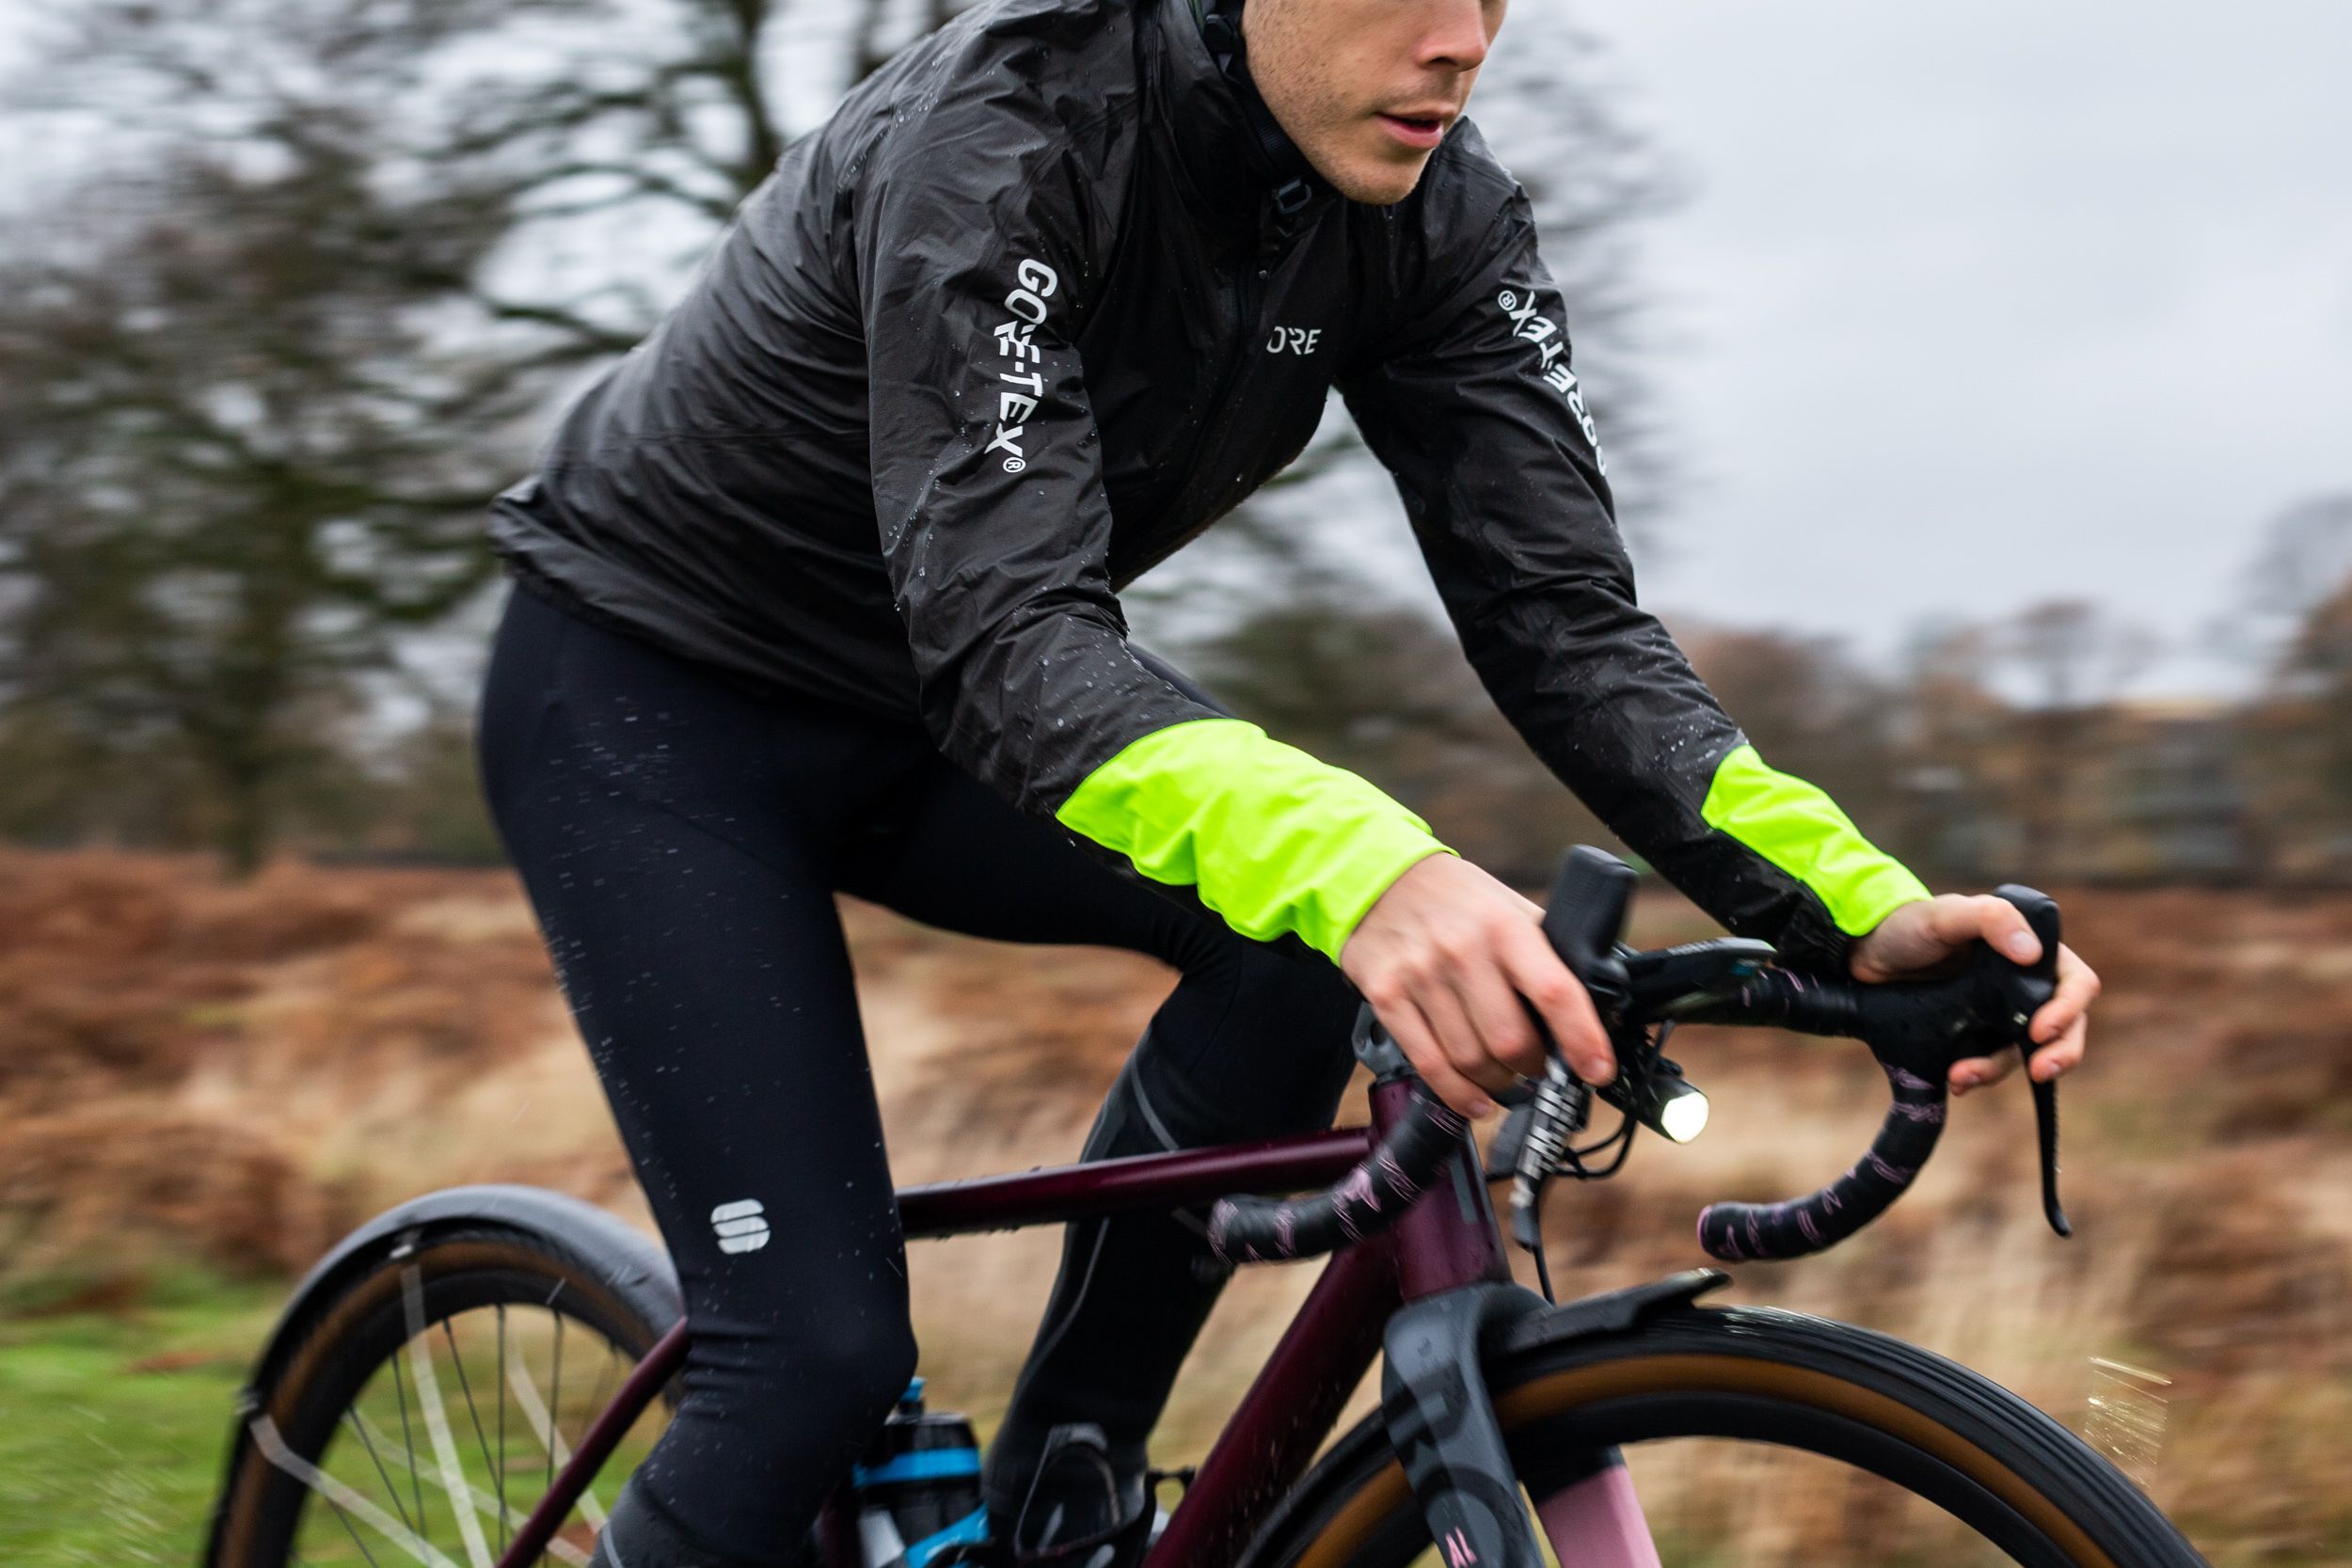 Sigma Sports on X: "The Gore Wear C5 Gore-Tex Shakedry Insulated 1985 Jacket,  keeping you warm and dry so you can ride in any weather &gt;  https://t.co/BBpOlyr1yy #BuiltByTheRide https://t.co/RQeJBmRtrA" / X